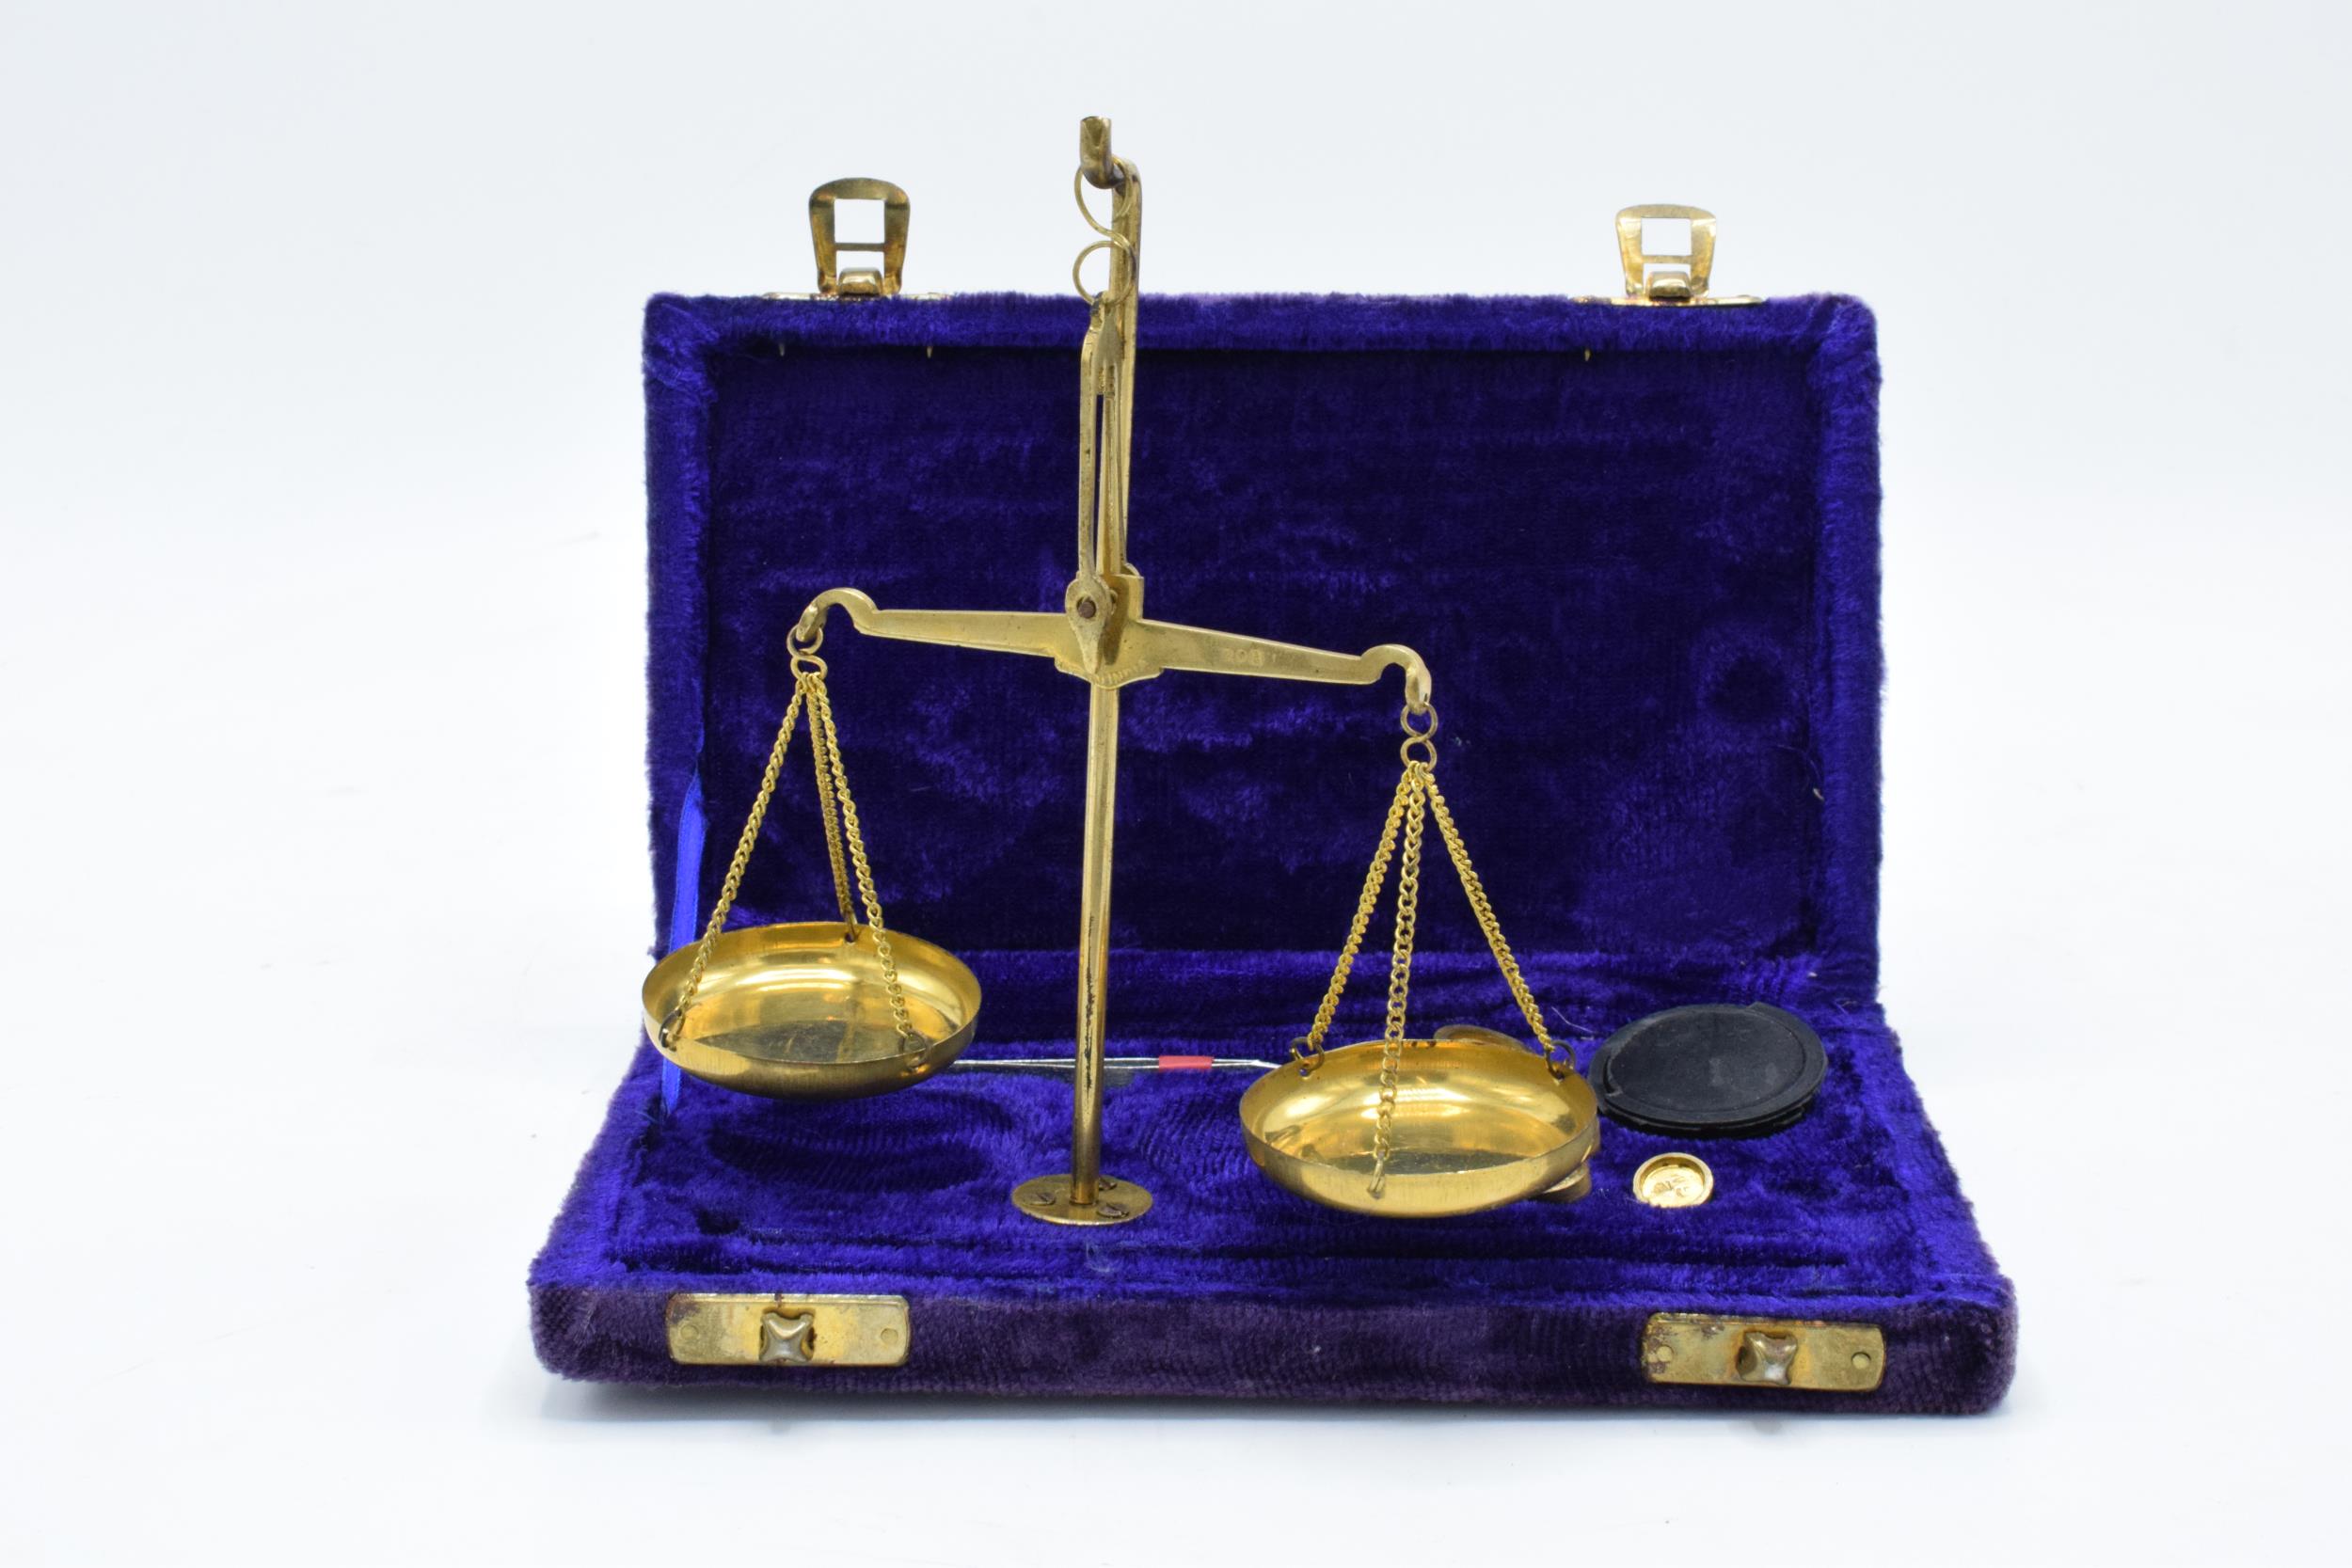 A cased set of brass portable scales with weights as large as 10 grams.